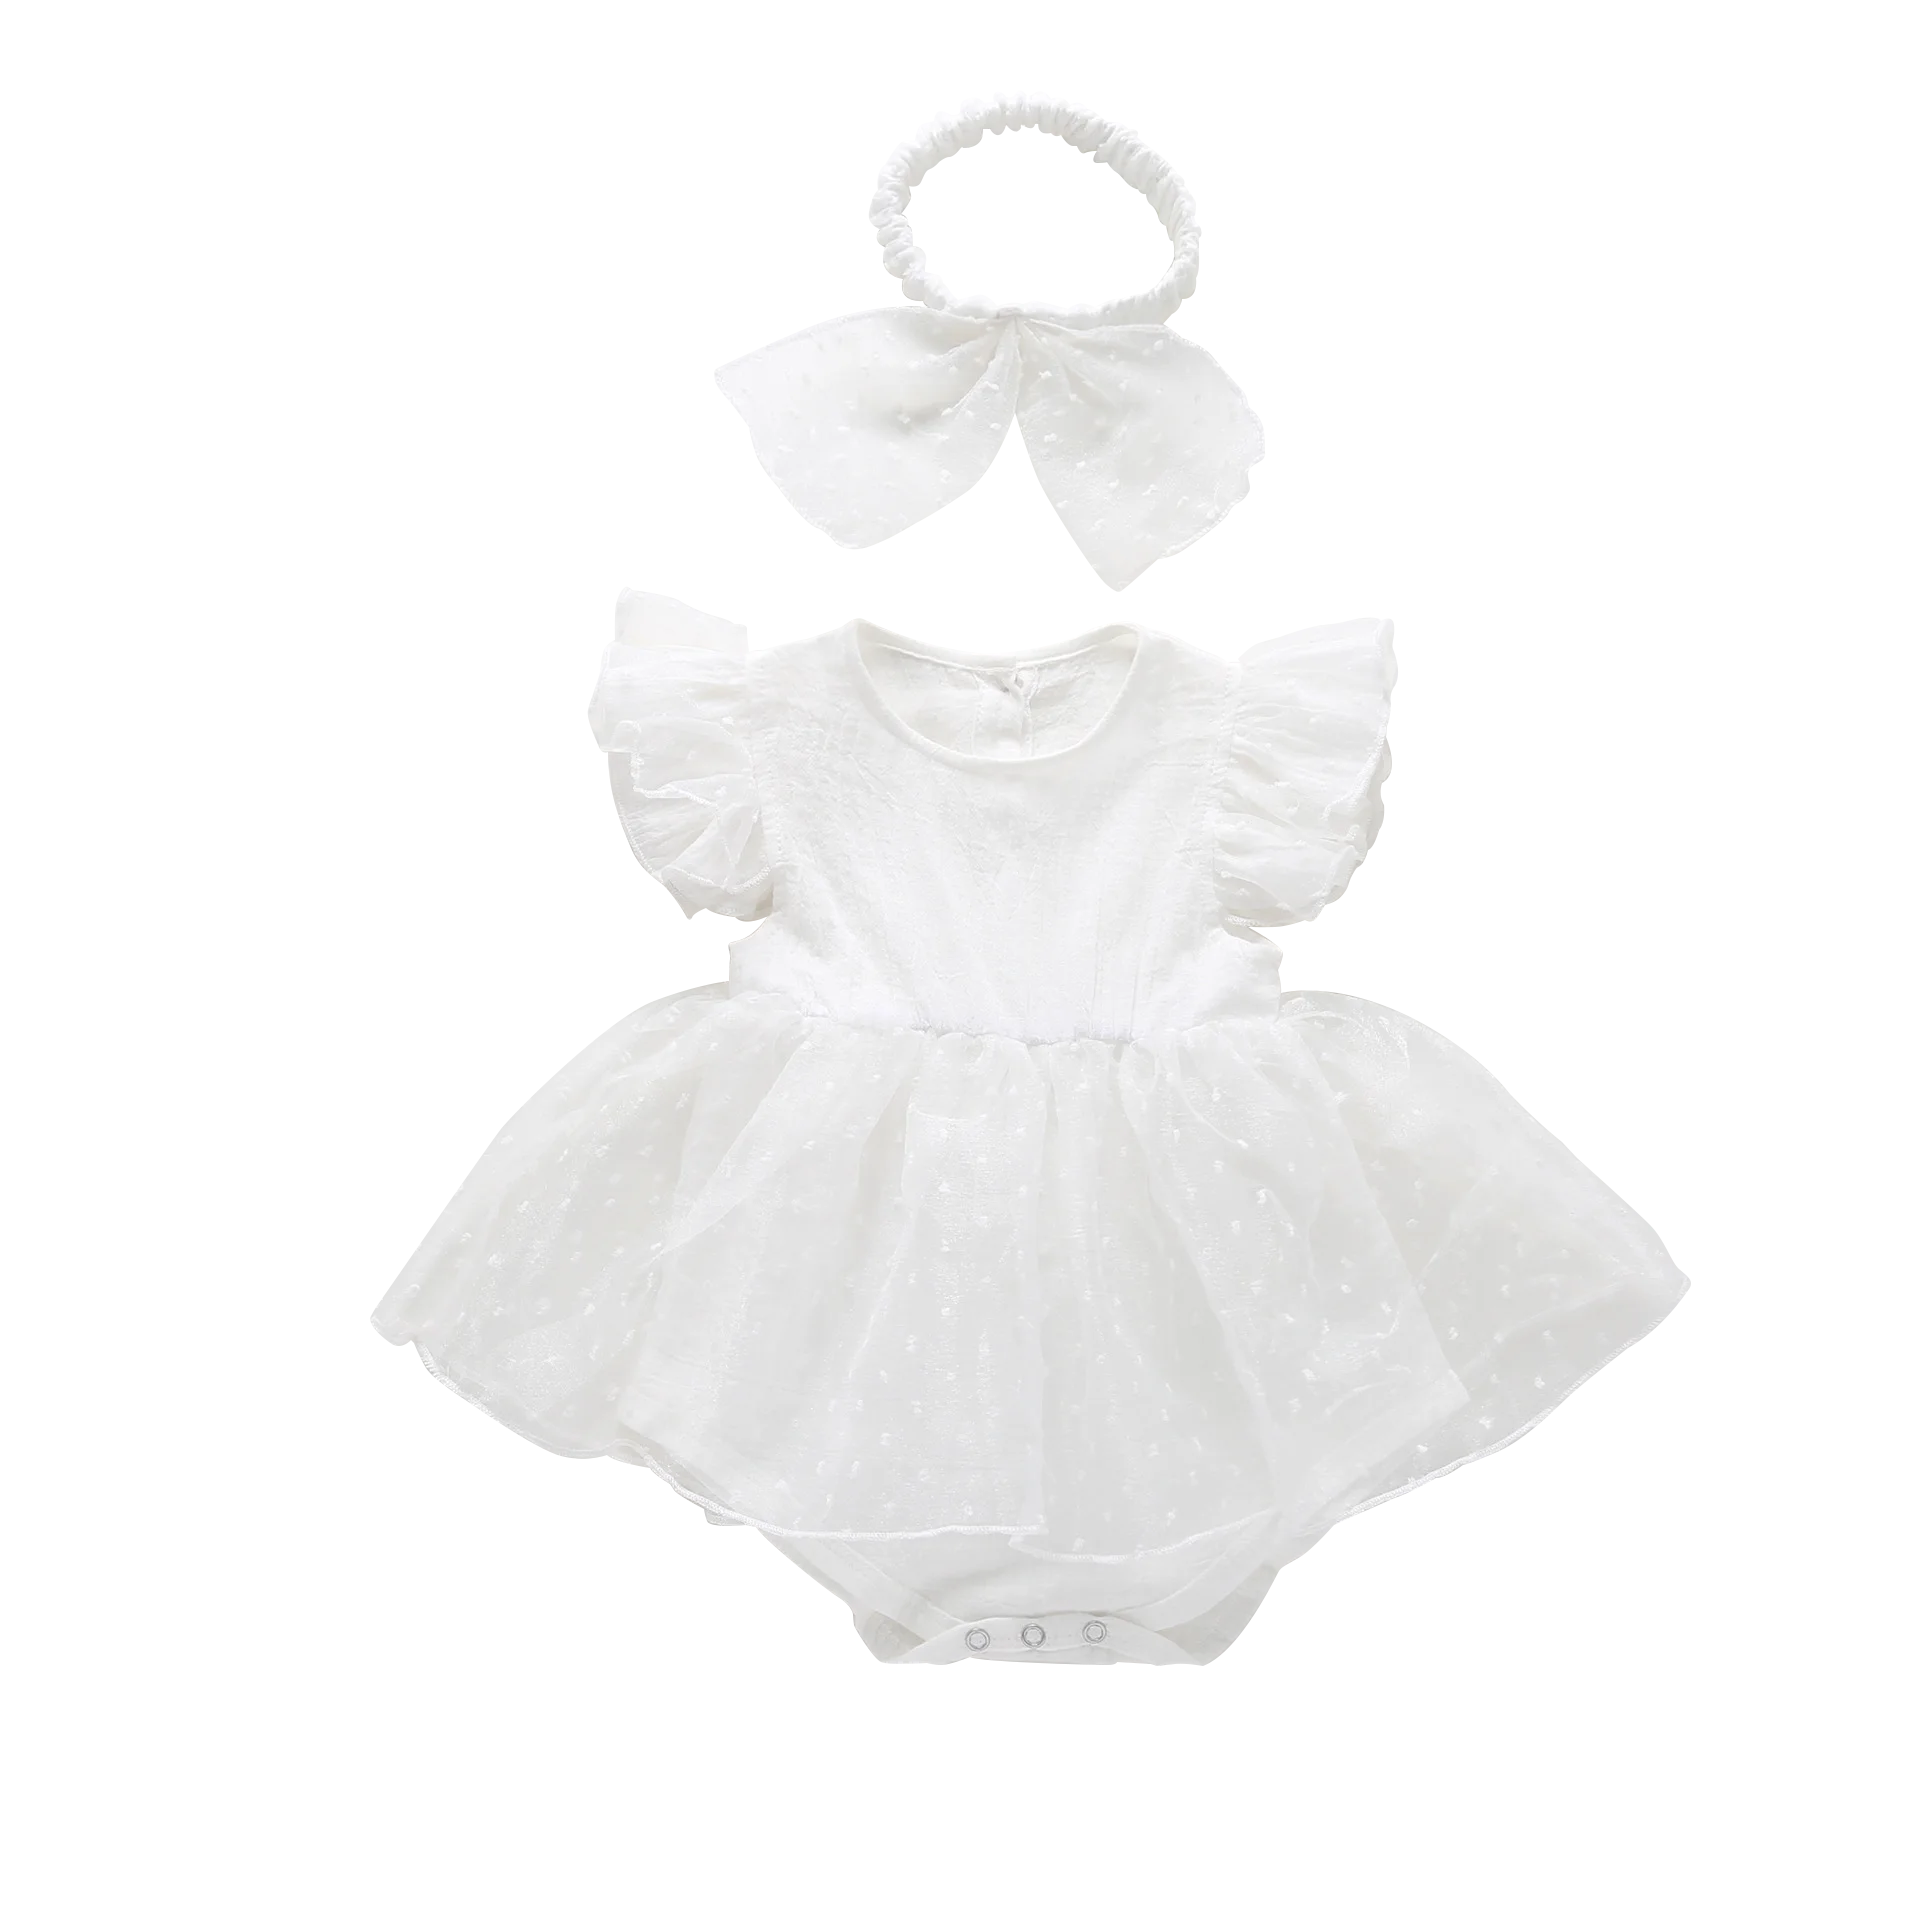 

What&why Summer Baby Girl Tutu Dress Romper White Newborn Lace Floral Infant Jumpsuit Kid Clothing Sets Smocked Onesie Wholesale